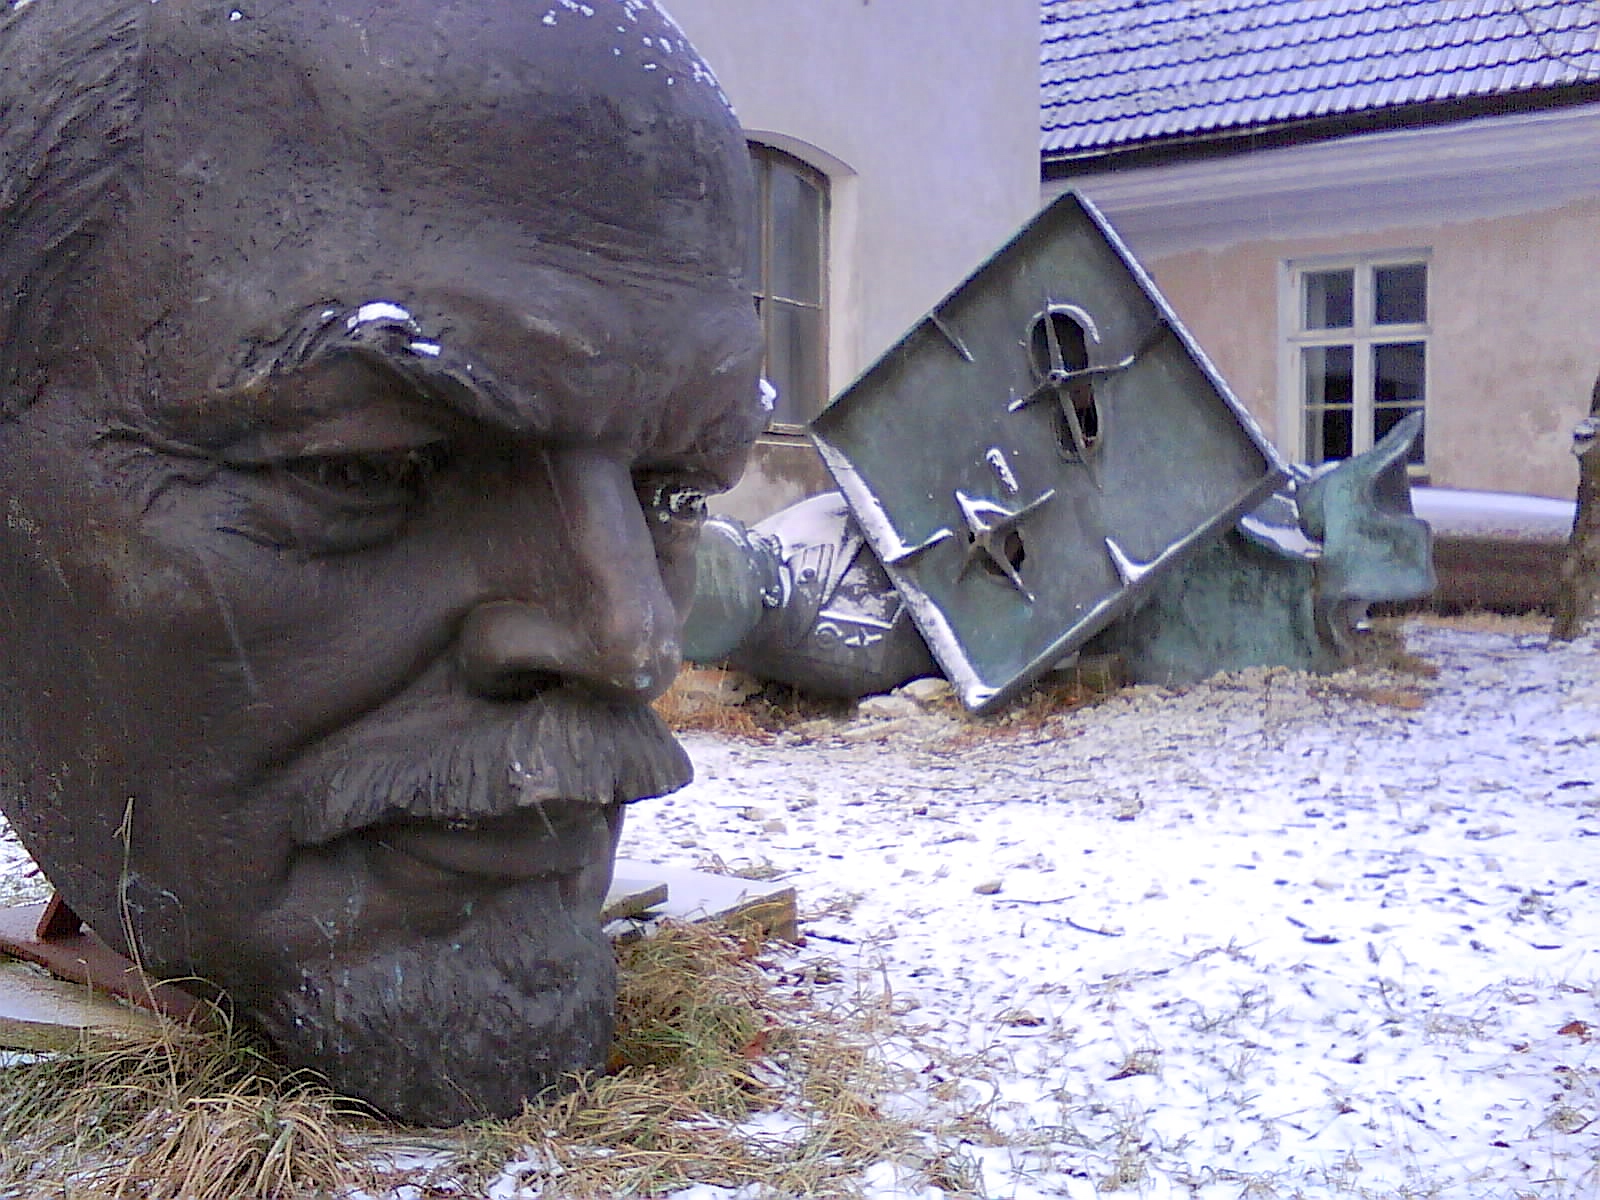 After the death of Lenin and the fall of his reputation, the head of a statue and one arm were deposited in an elementary school yard in Grosny, Chechnya.